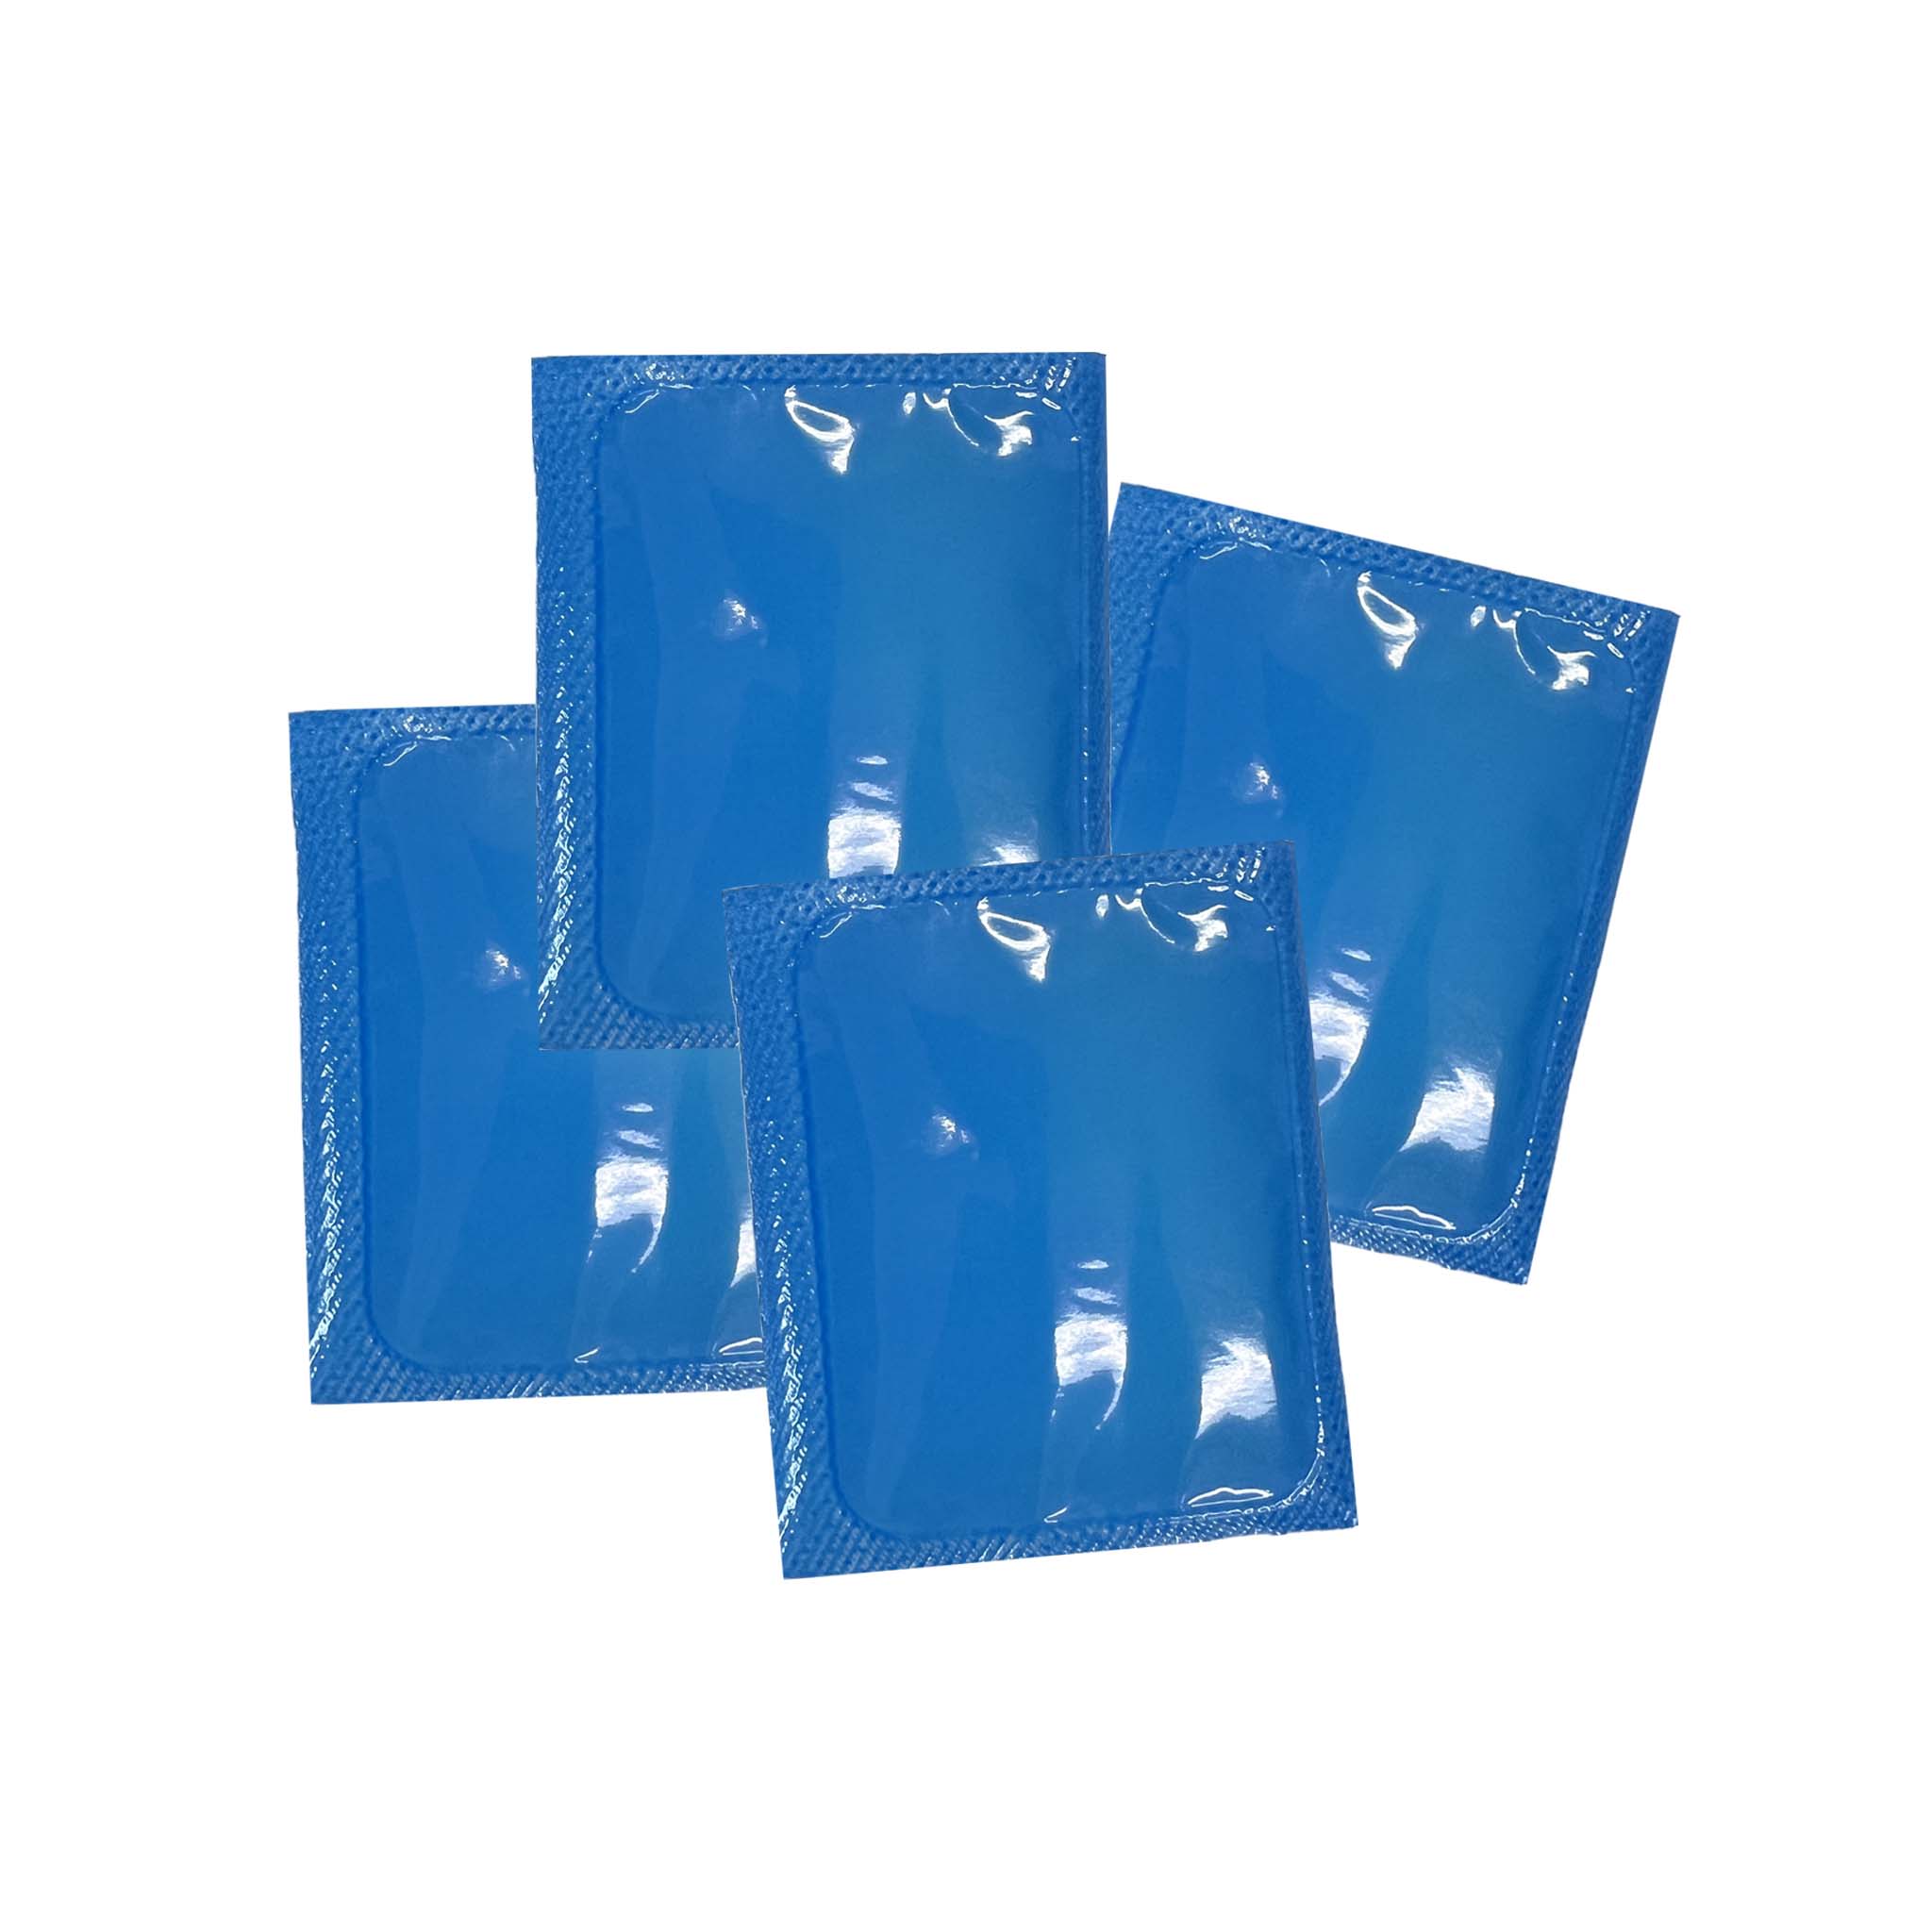 Stretto Violin/Viola Humidifier Replacement Bags, 4-Pack